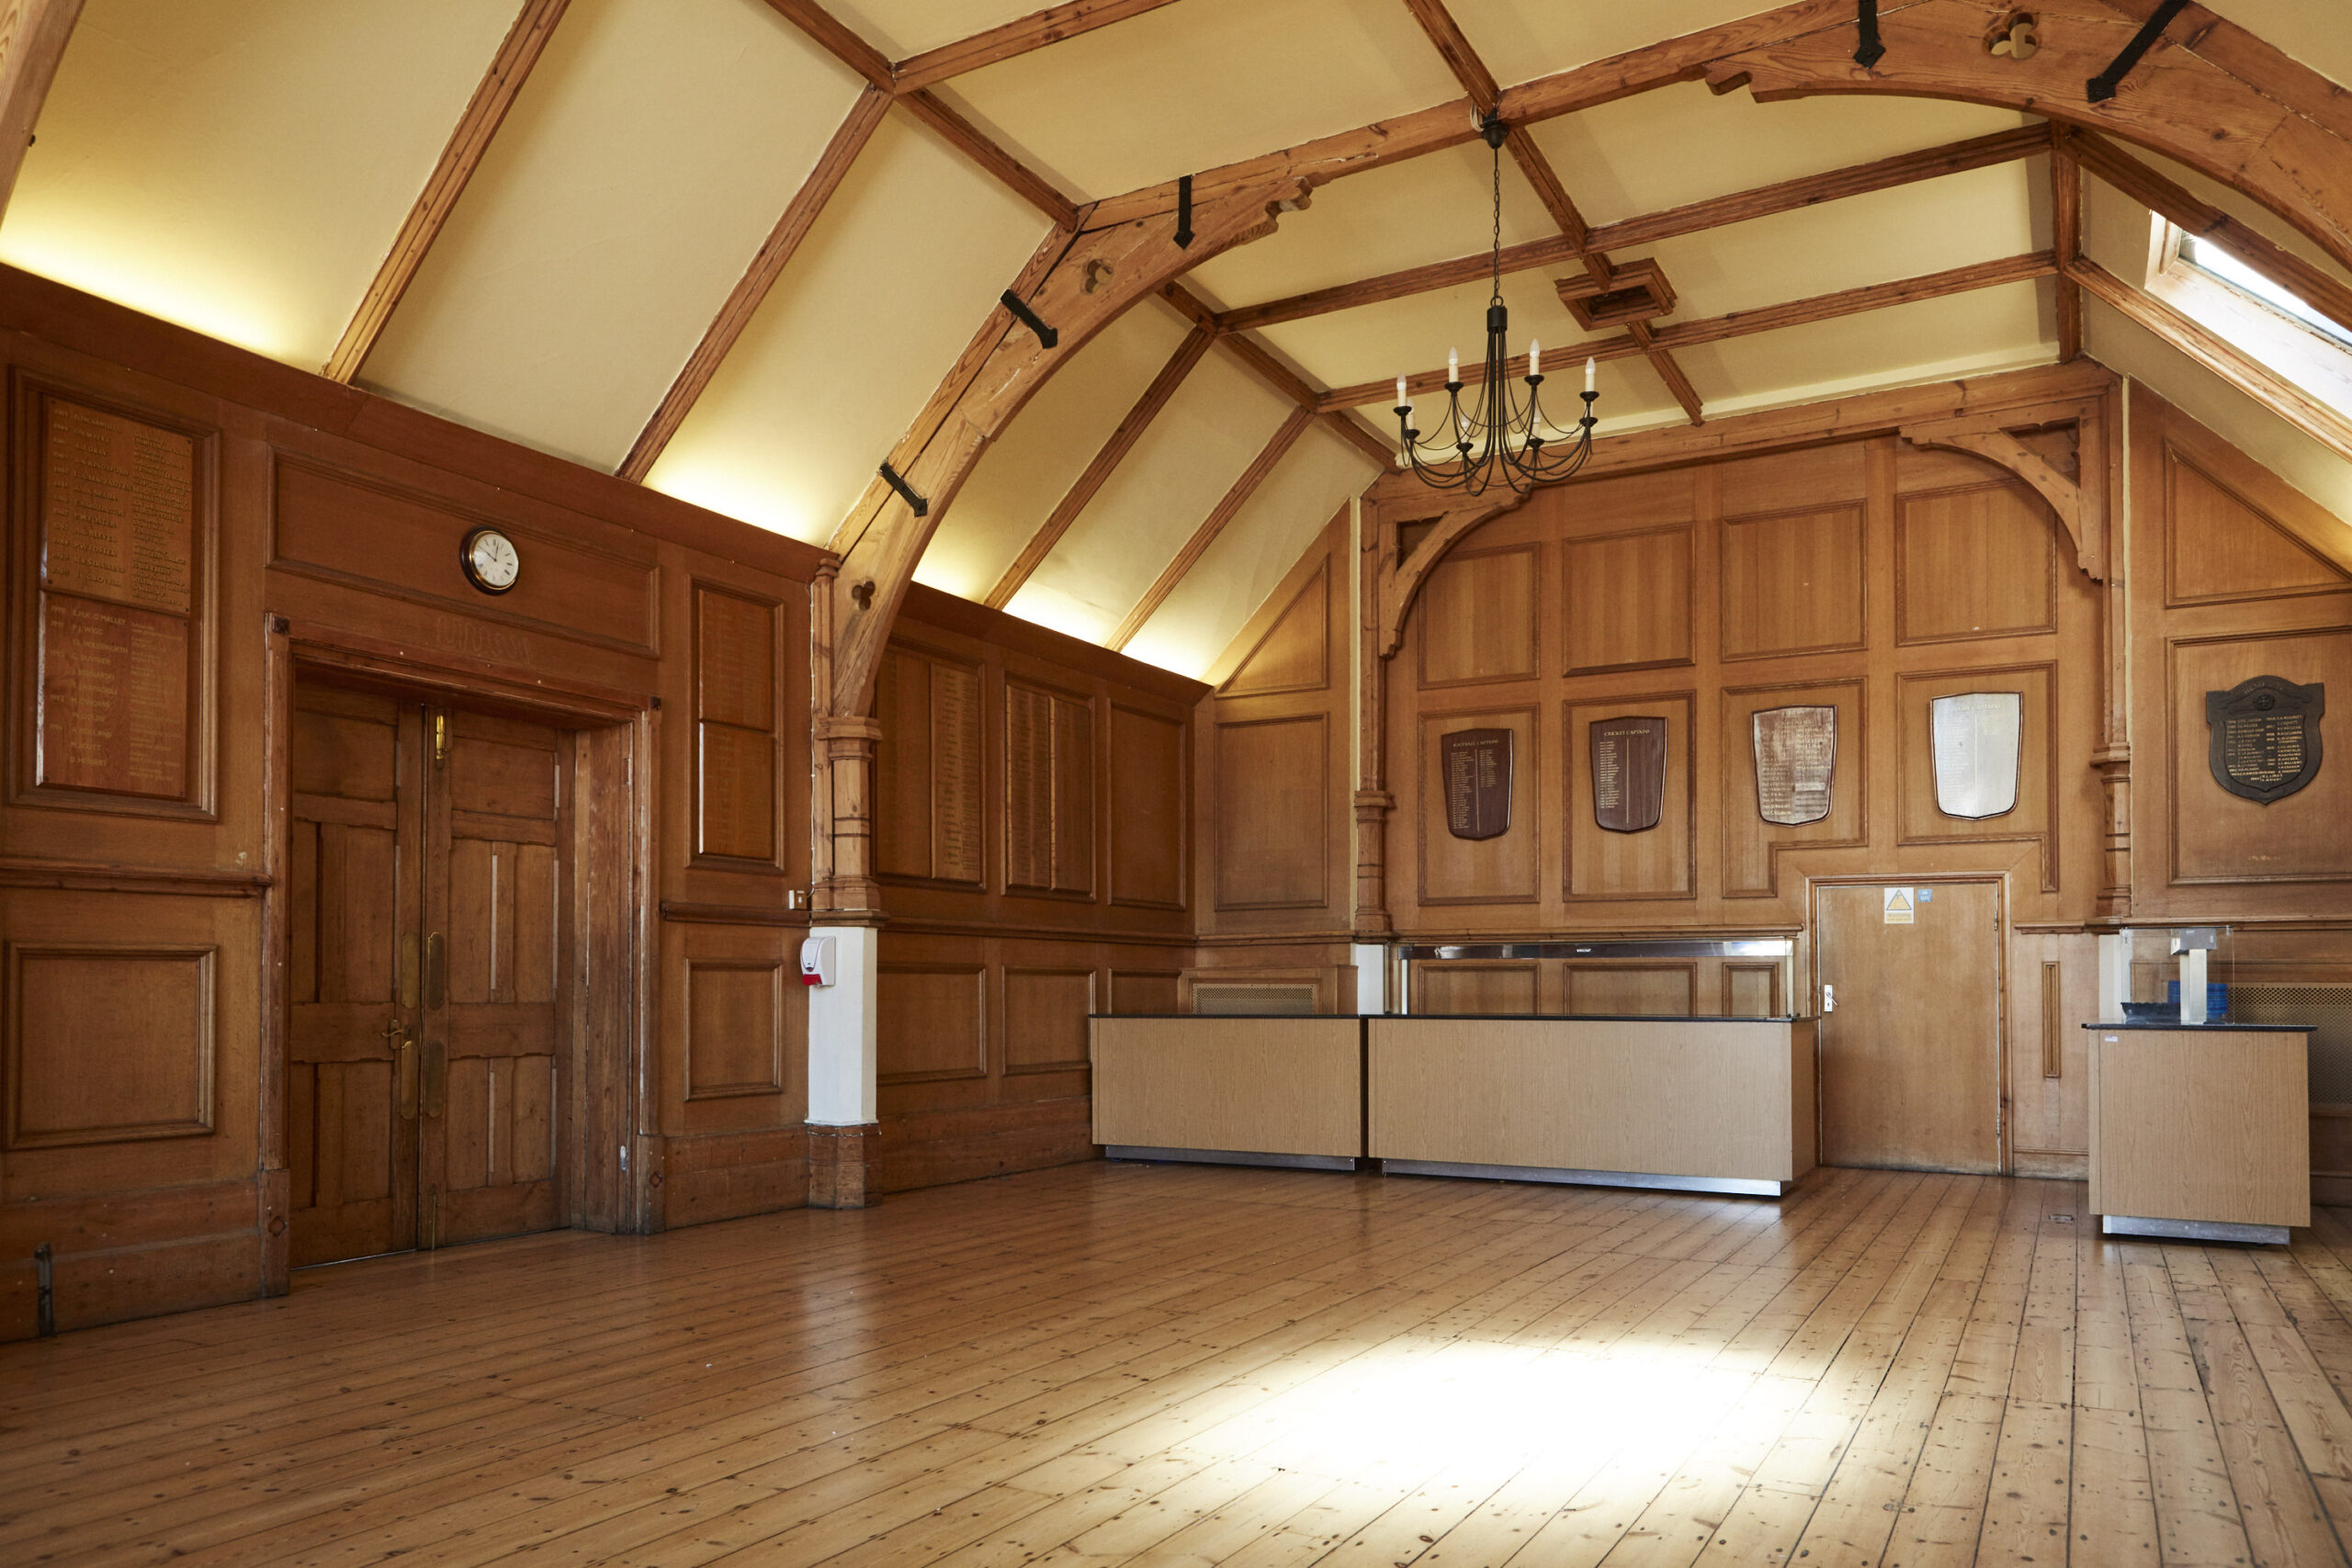 The inside of an empty school dining room. The floors and walls are wood, and there are shields on the walls.